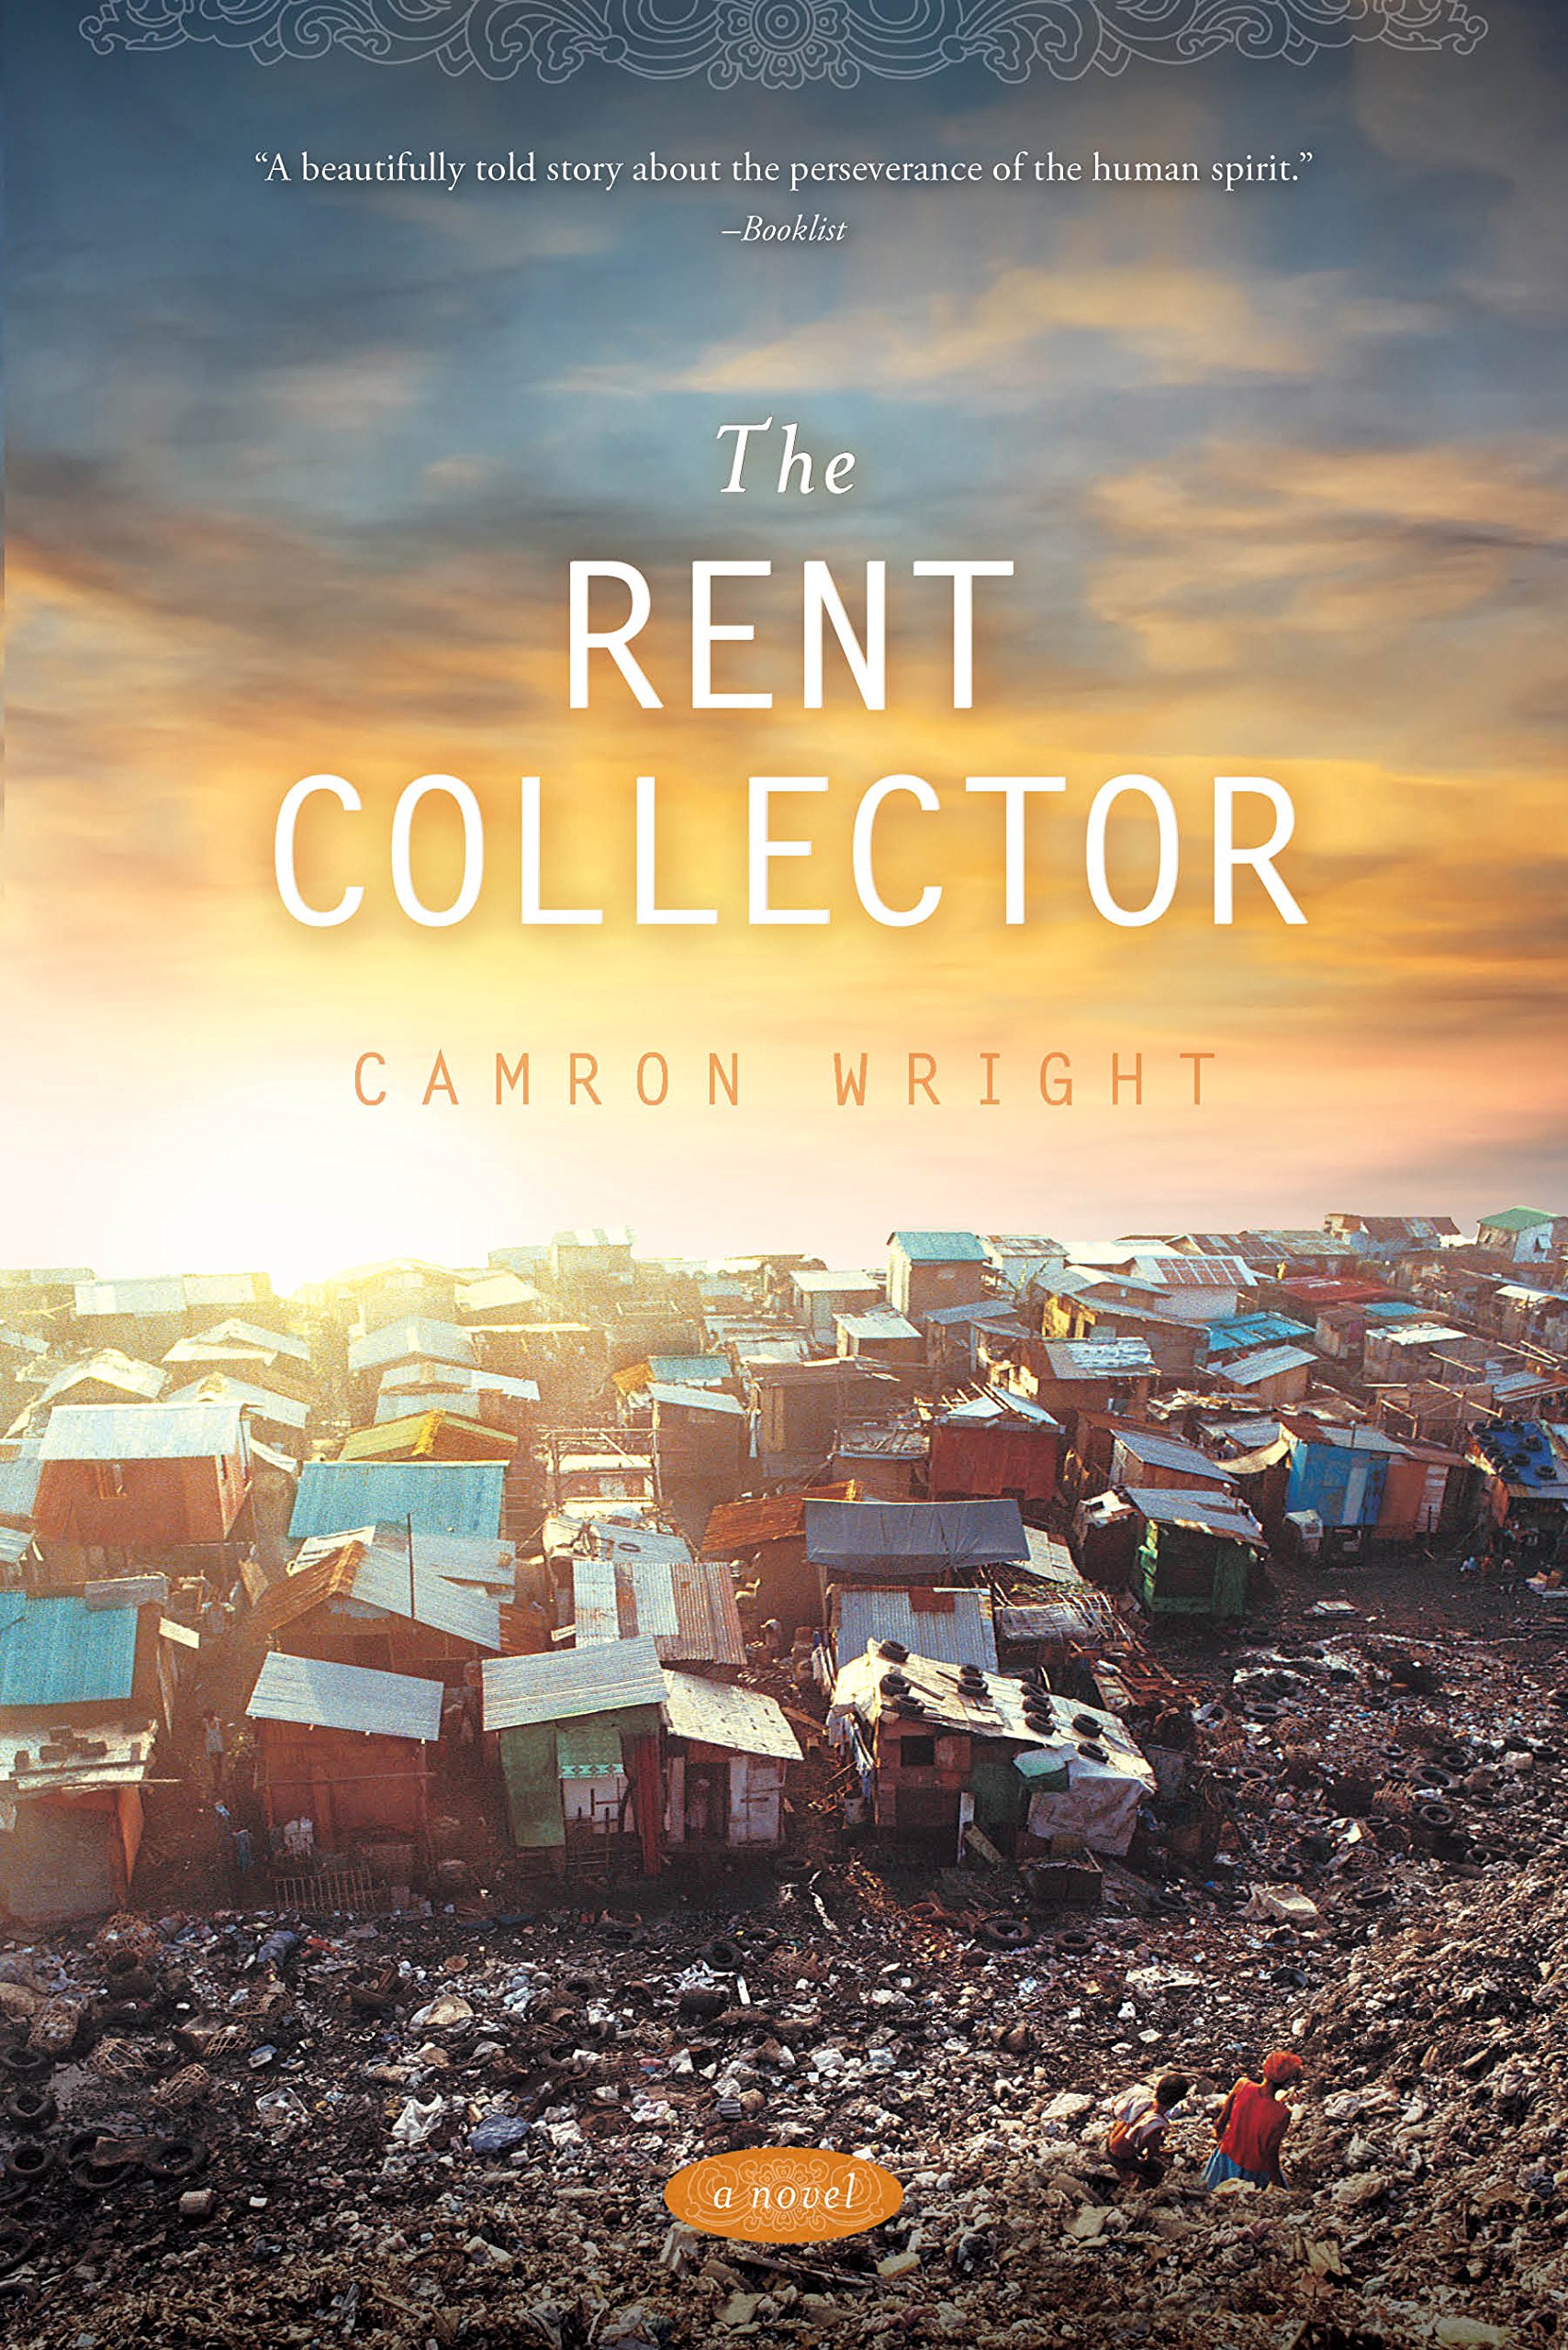 The Rent Collector book cover